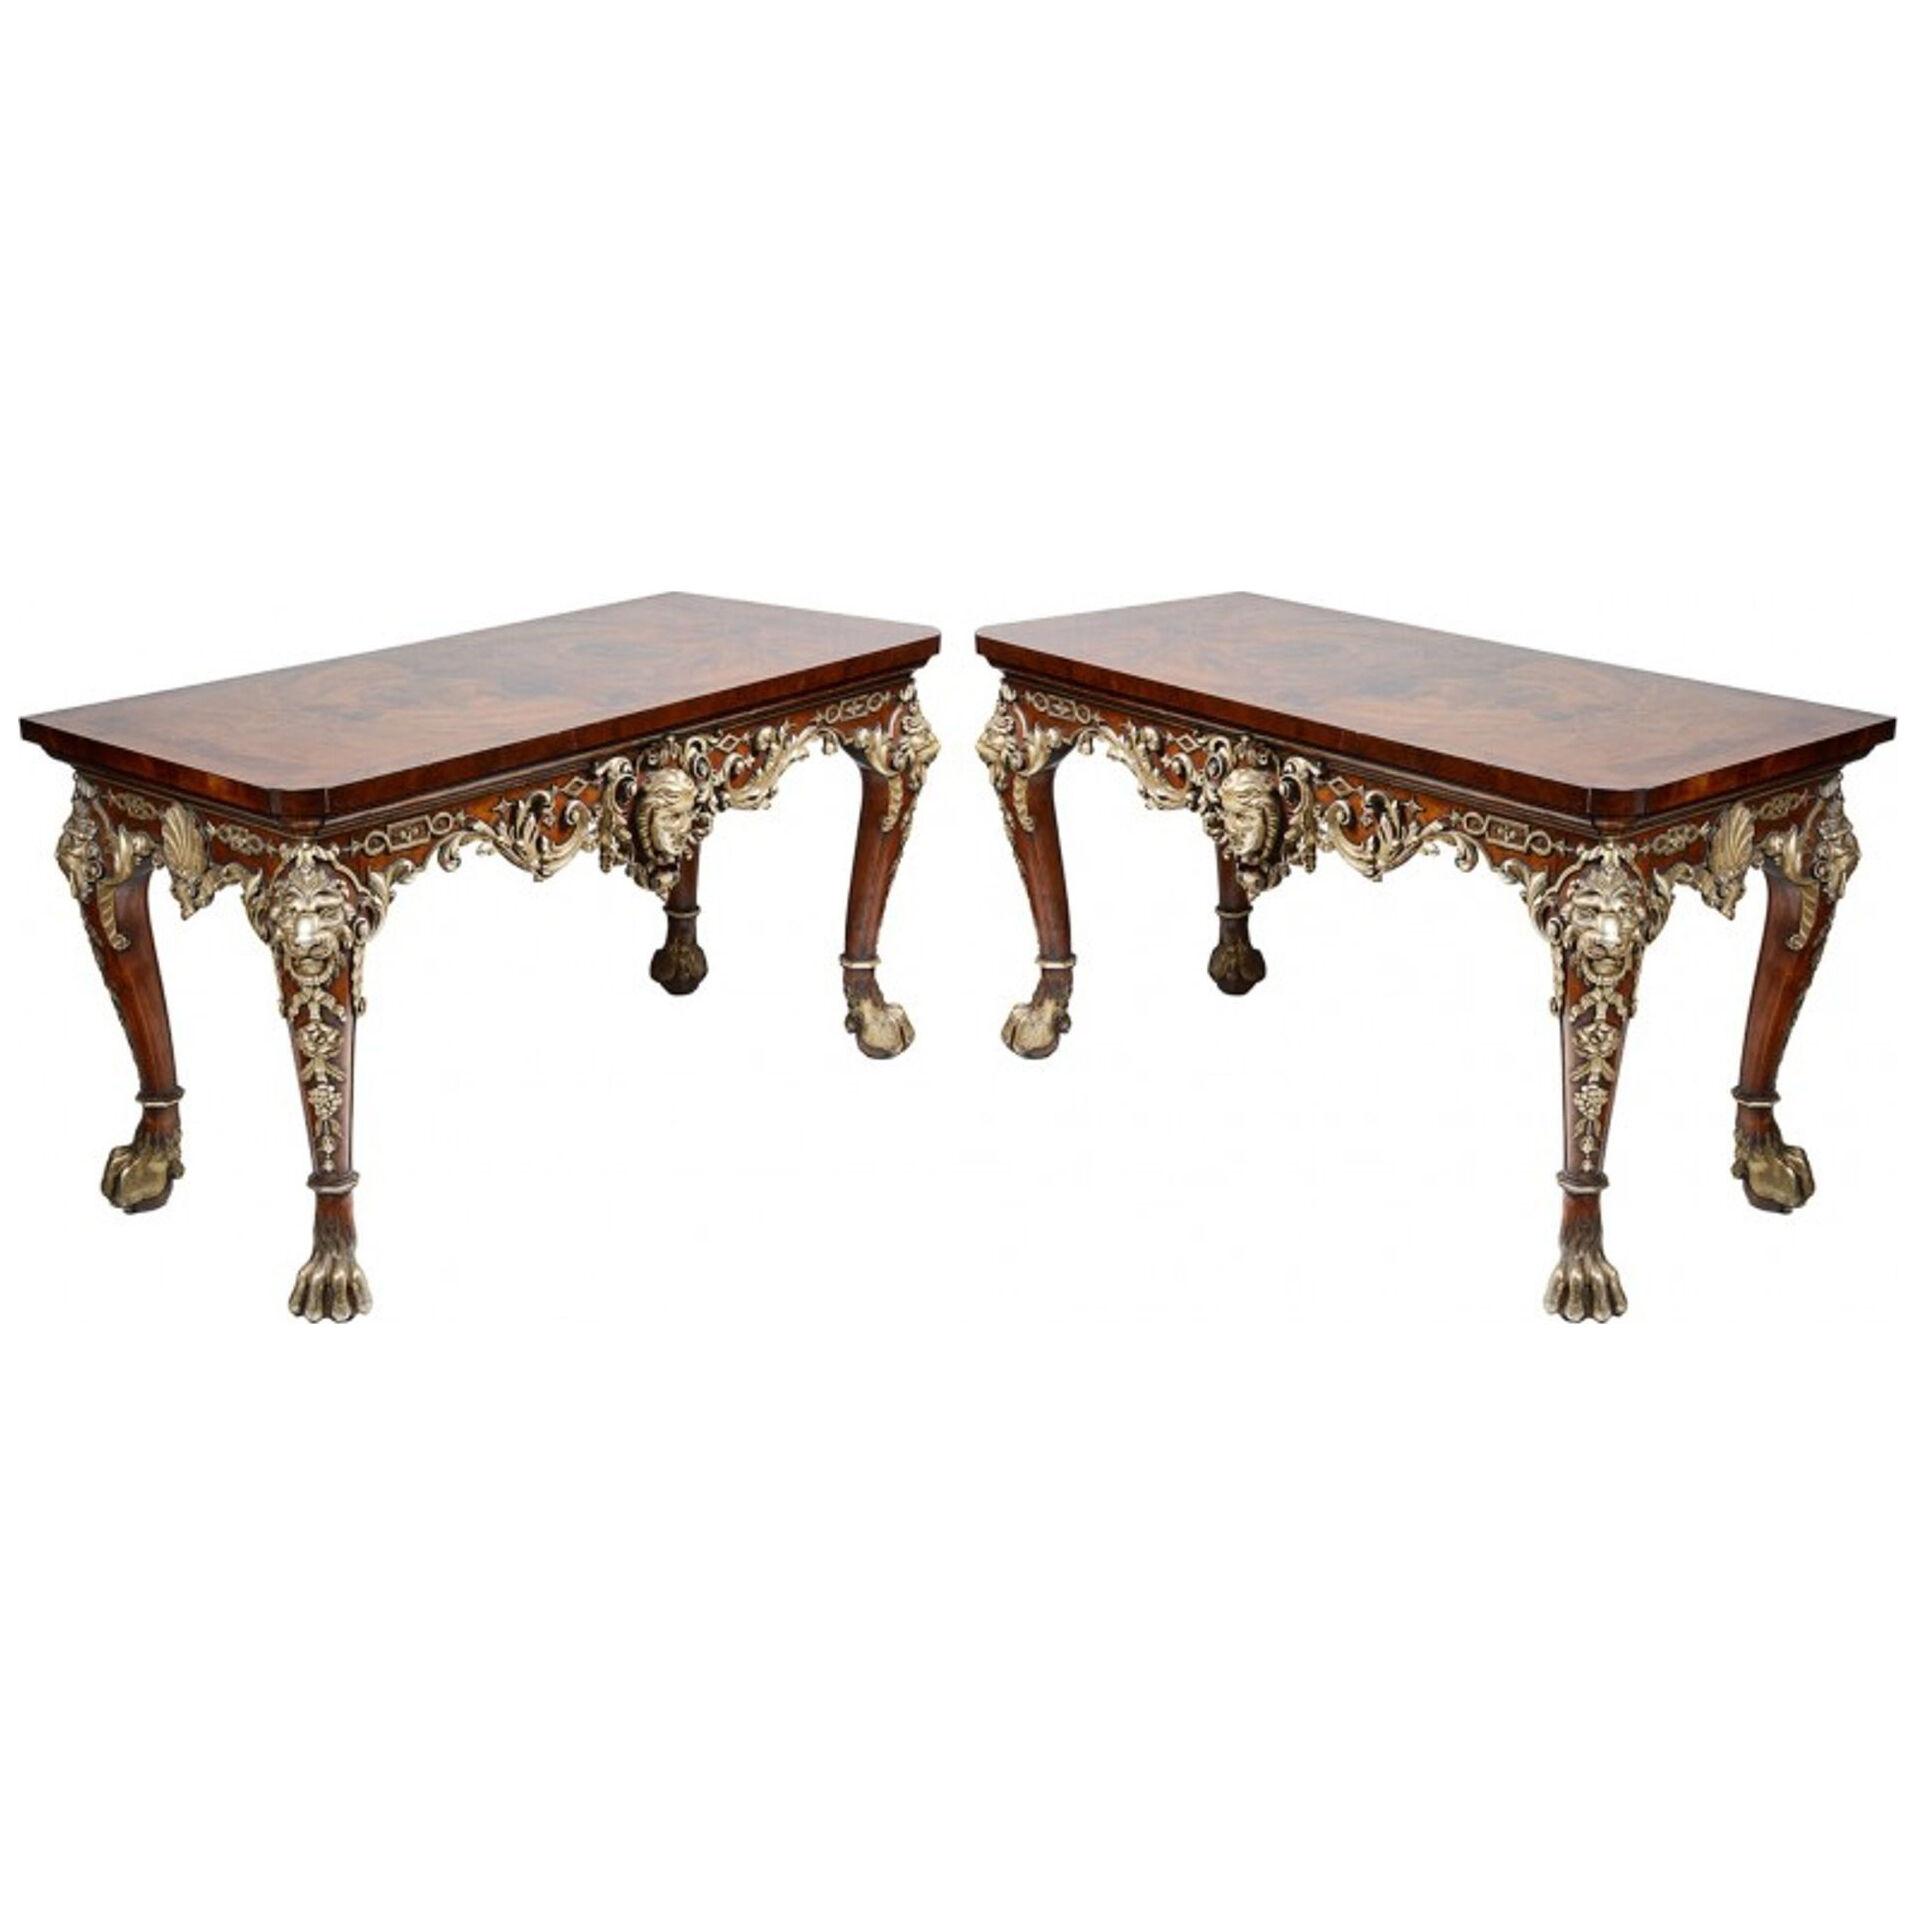 Large pair of Willaim Kent style Console tables.